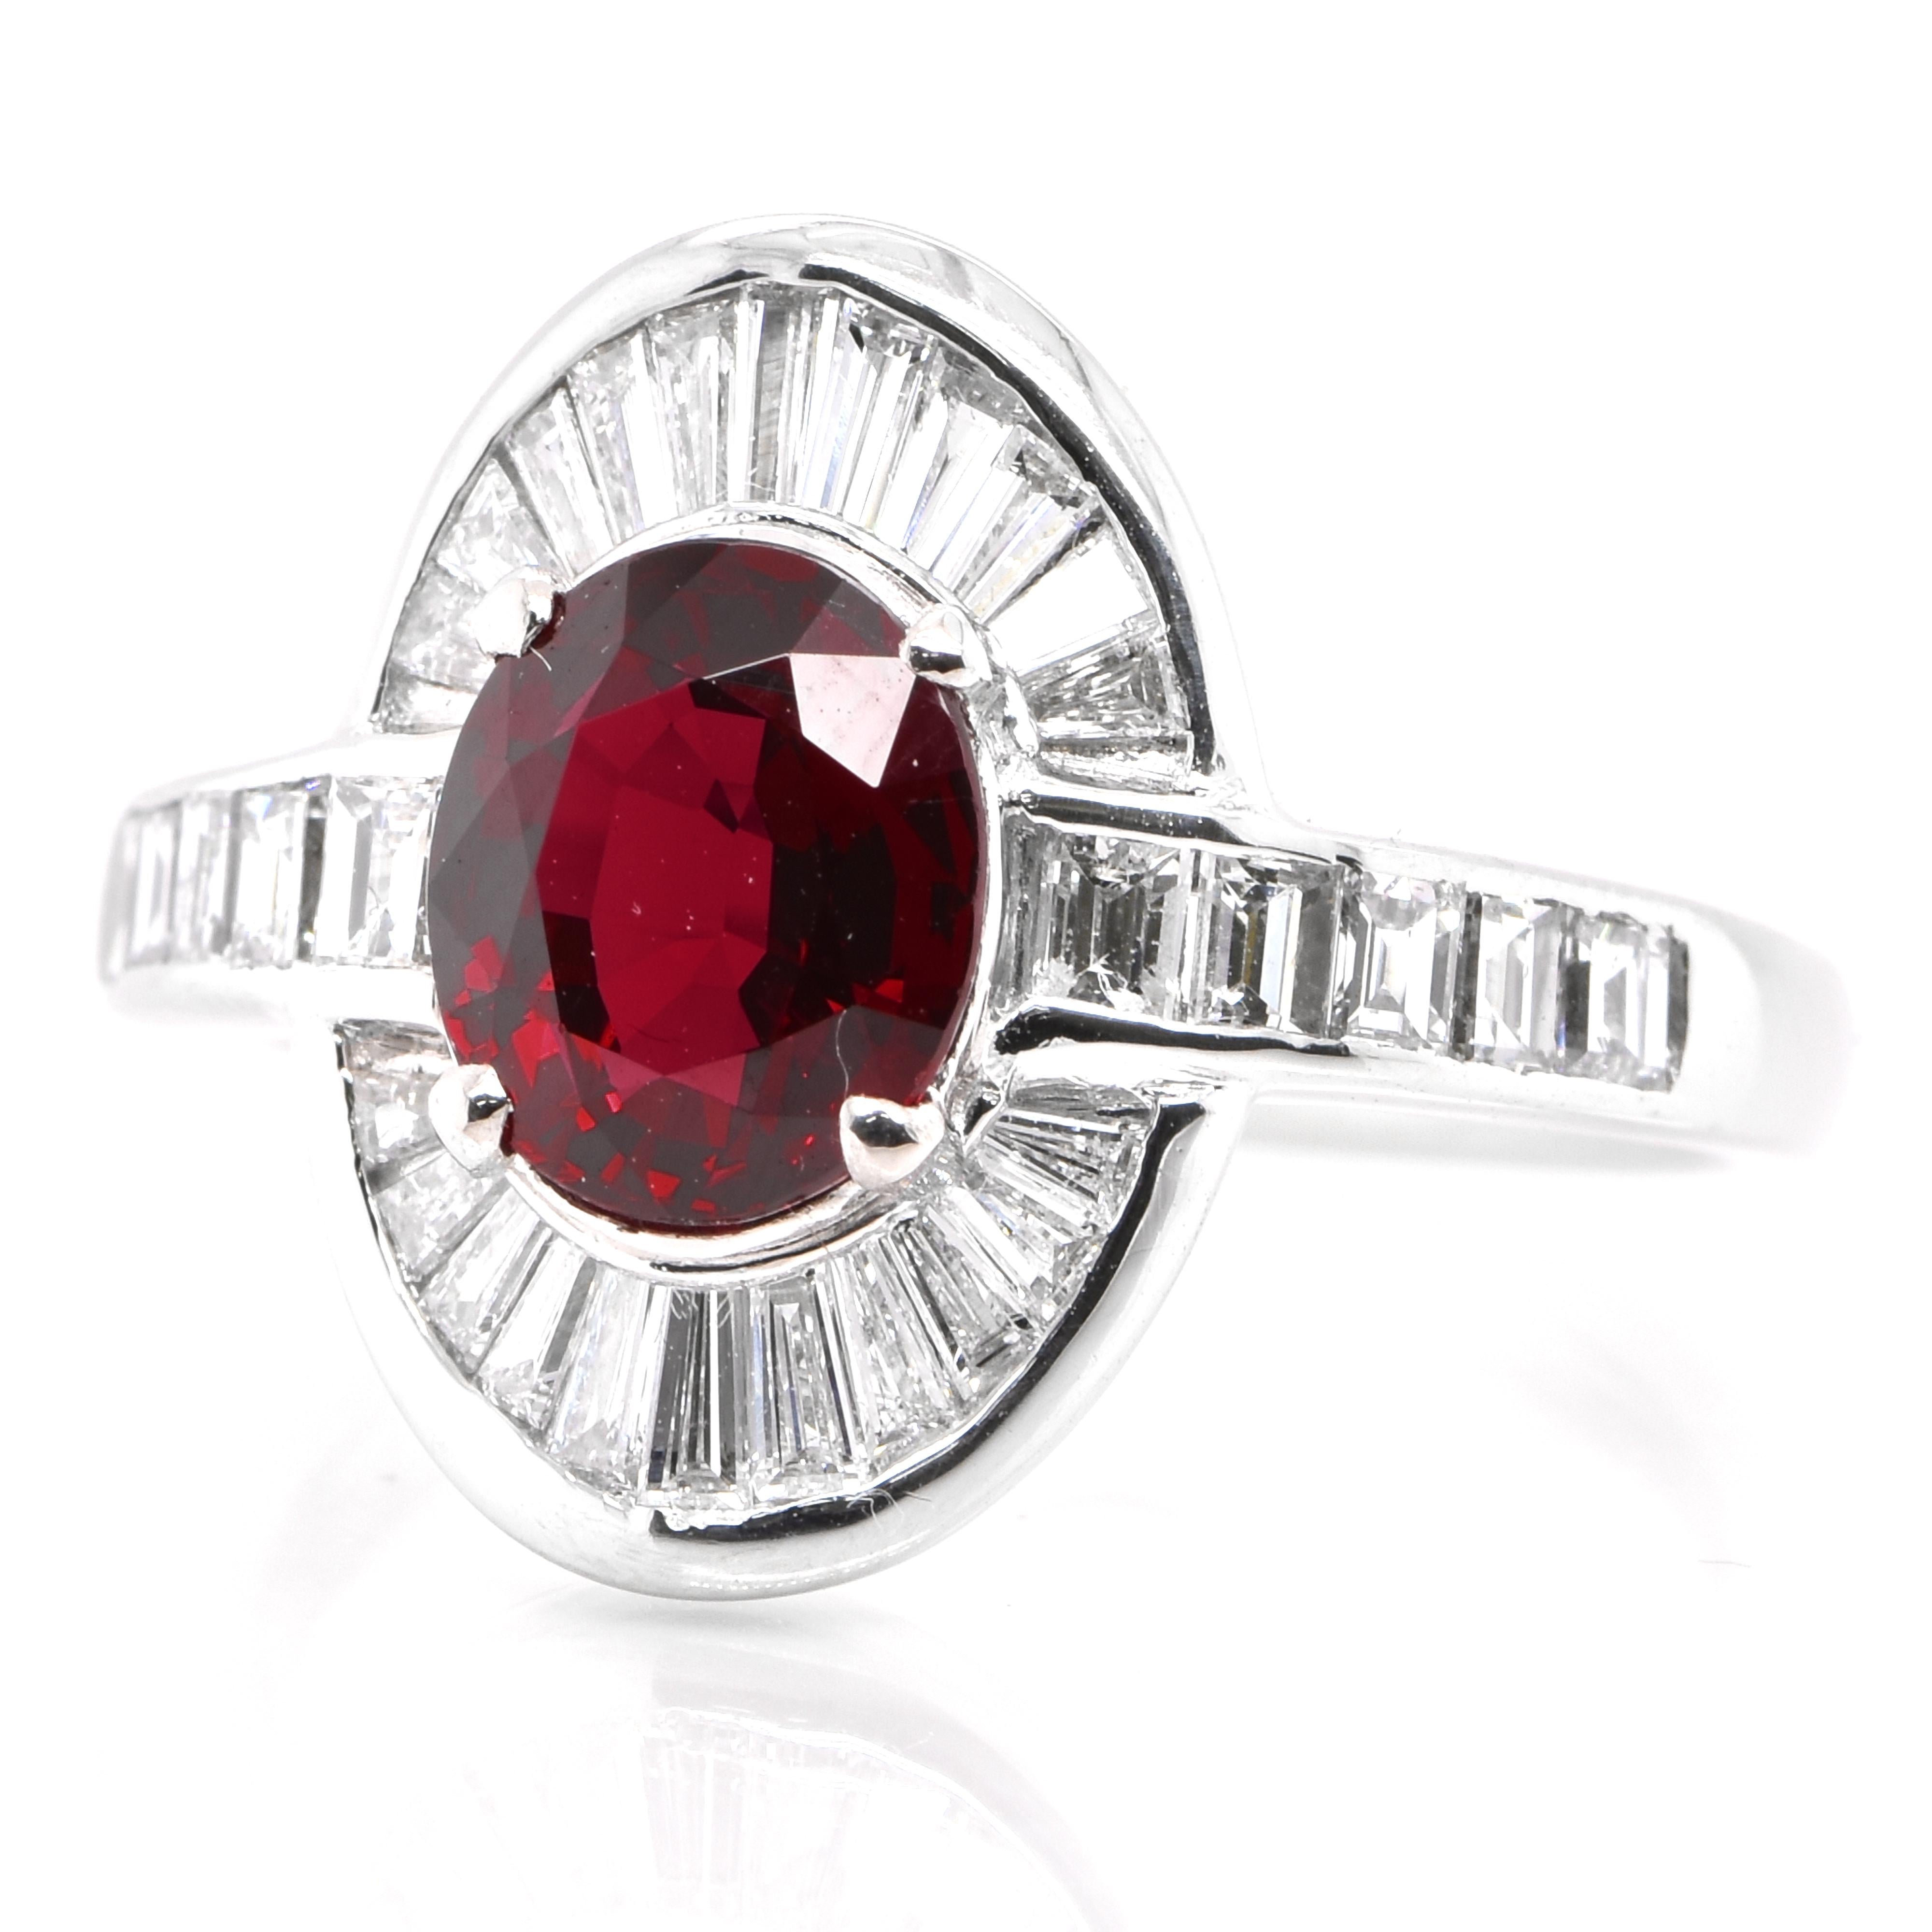 A beautiful Estate Cocktail ring set in Platinum featuring a GIA Certified 2.03 Carat Natural Thailand Crimson Red Ruby and 0.92 Carats of Diamond Accents. Rubies are referred to as 